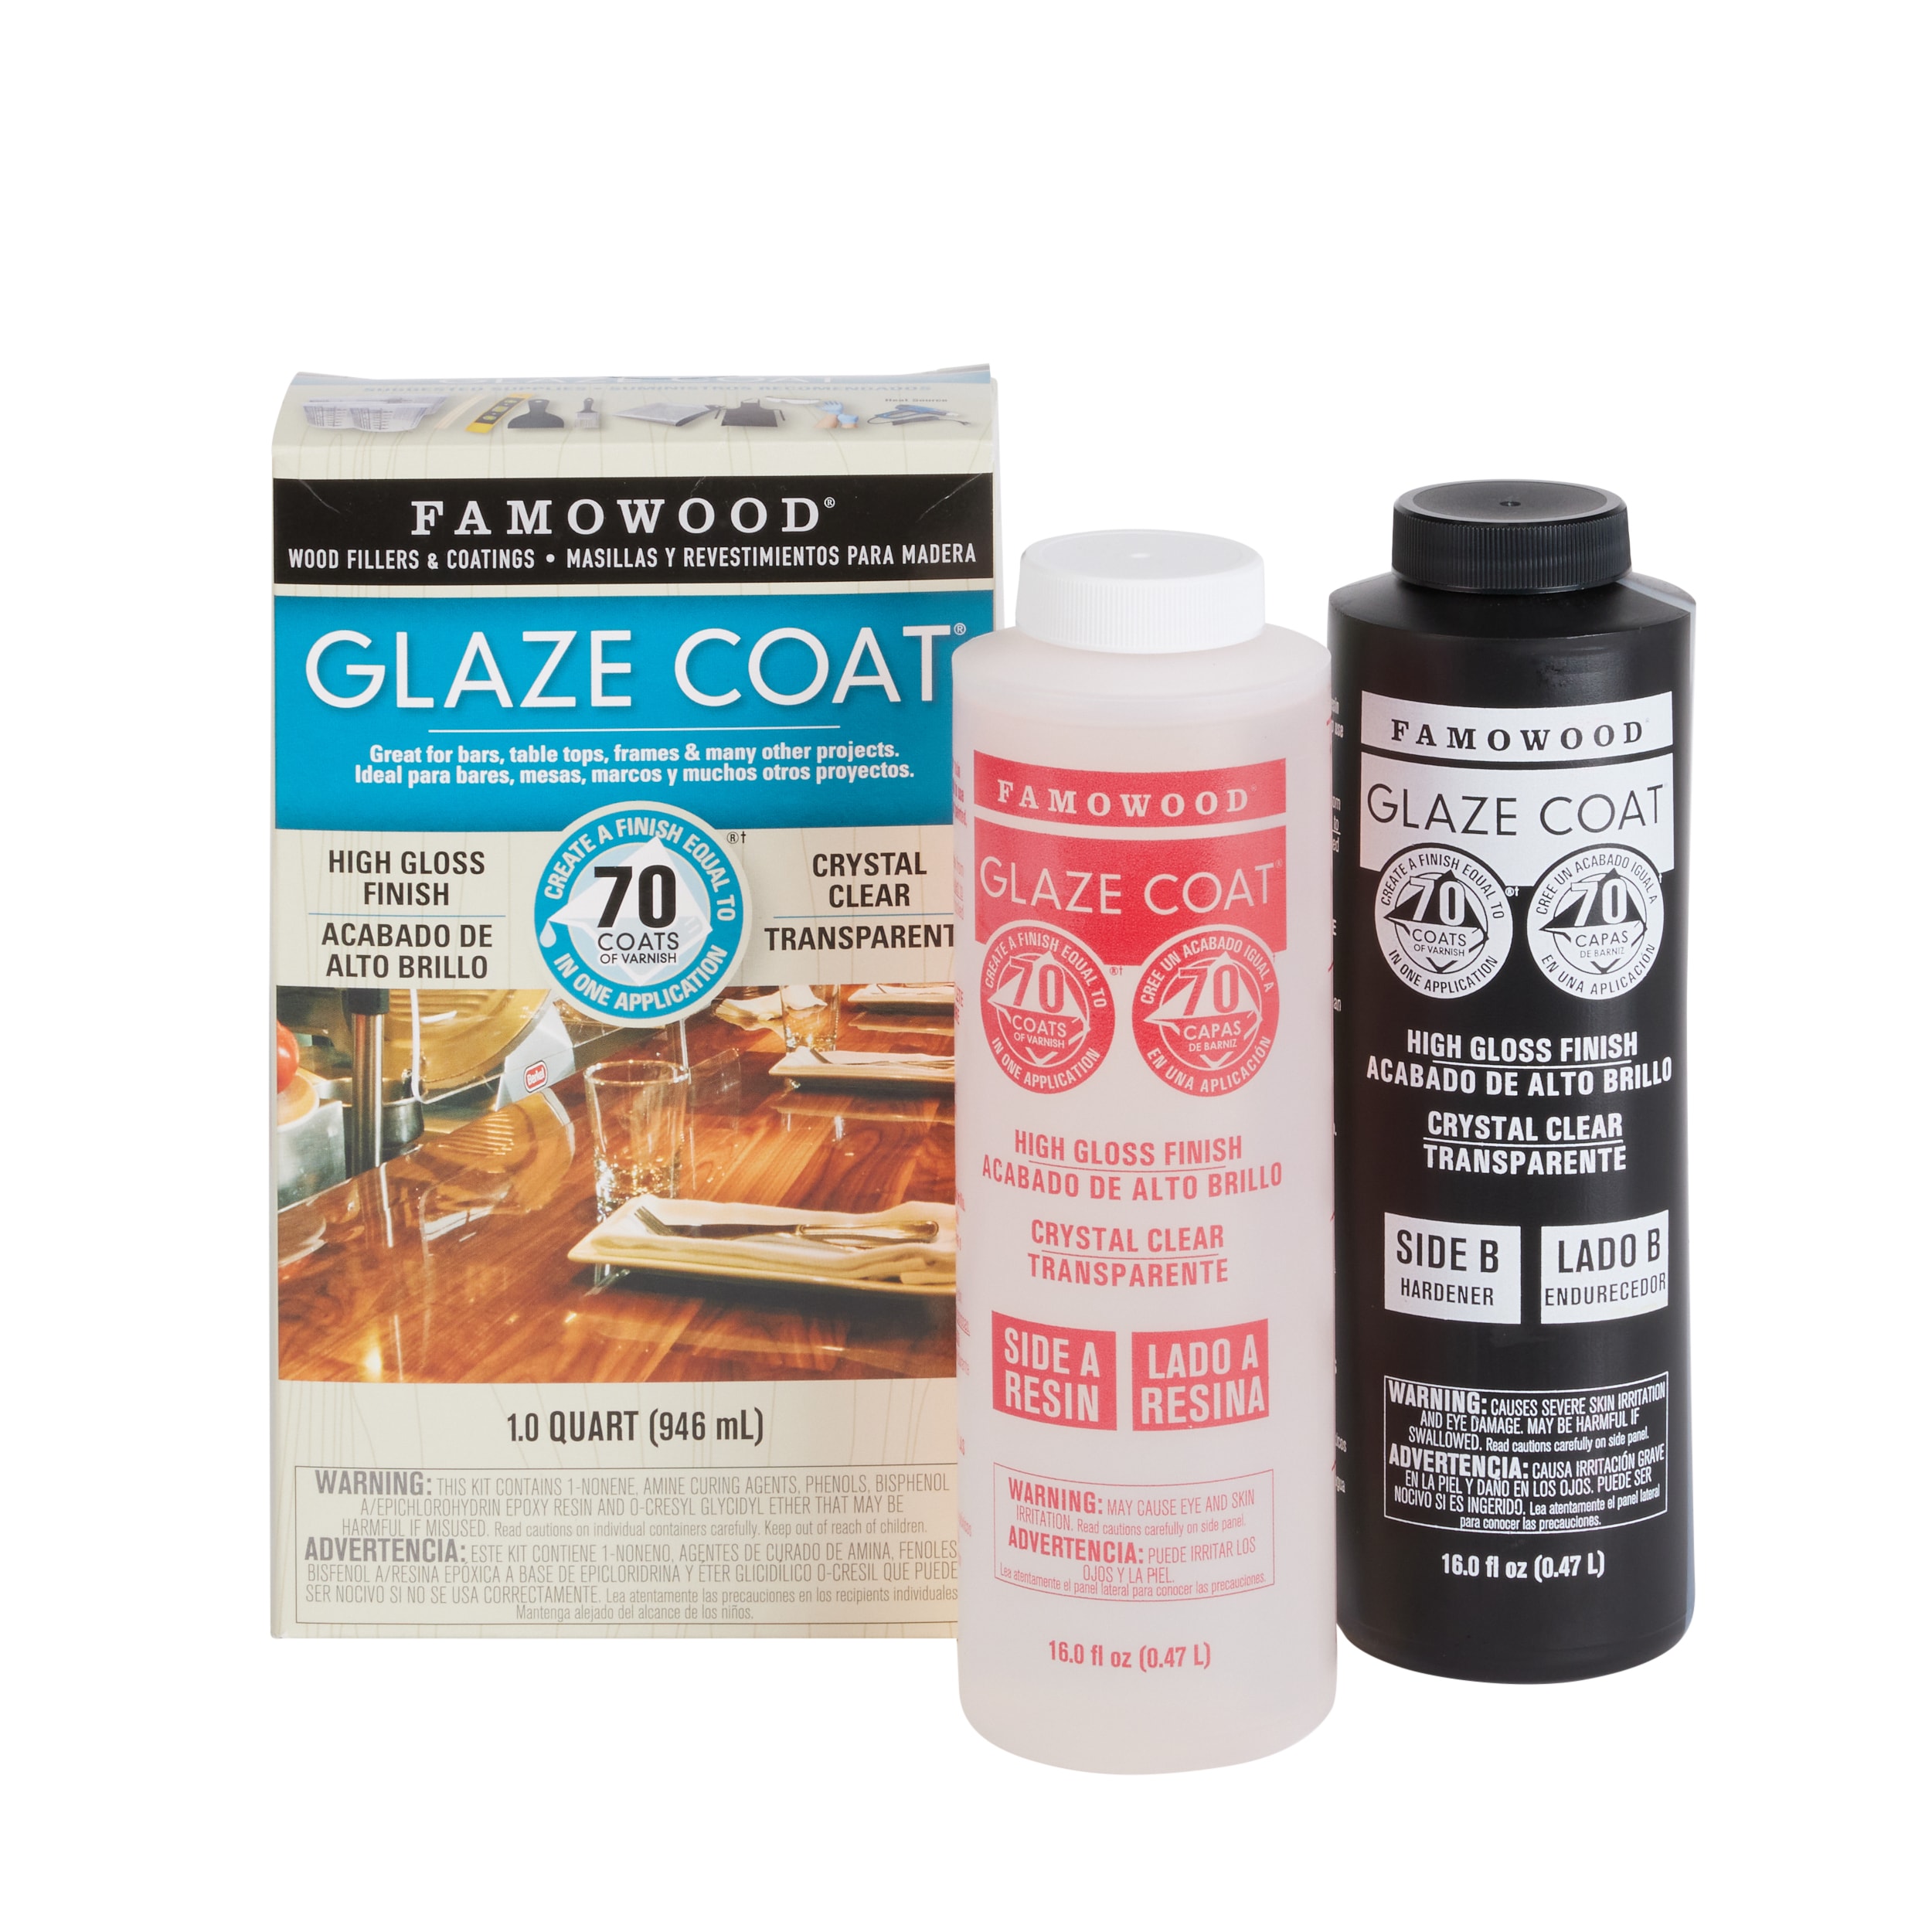 What Is The BEST Tabletop EPOXY Resin - Famowood Glazecoat vs